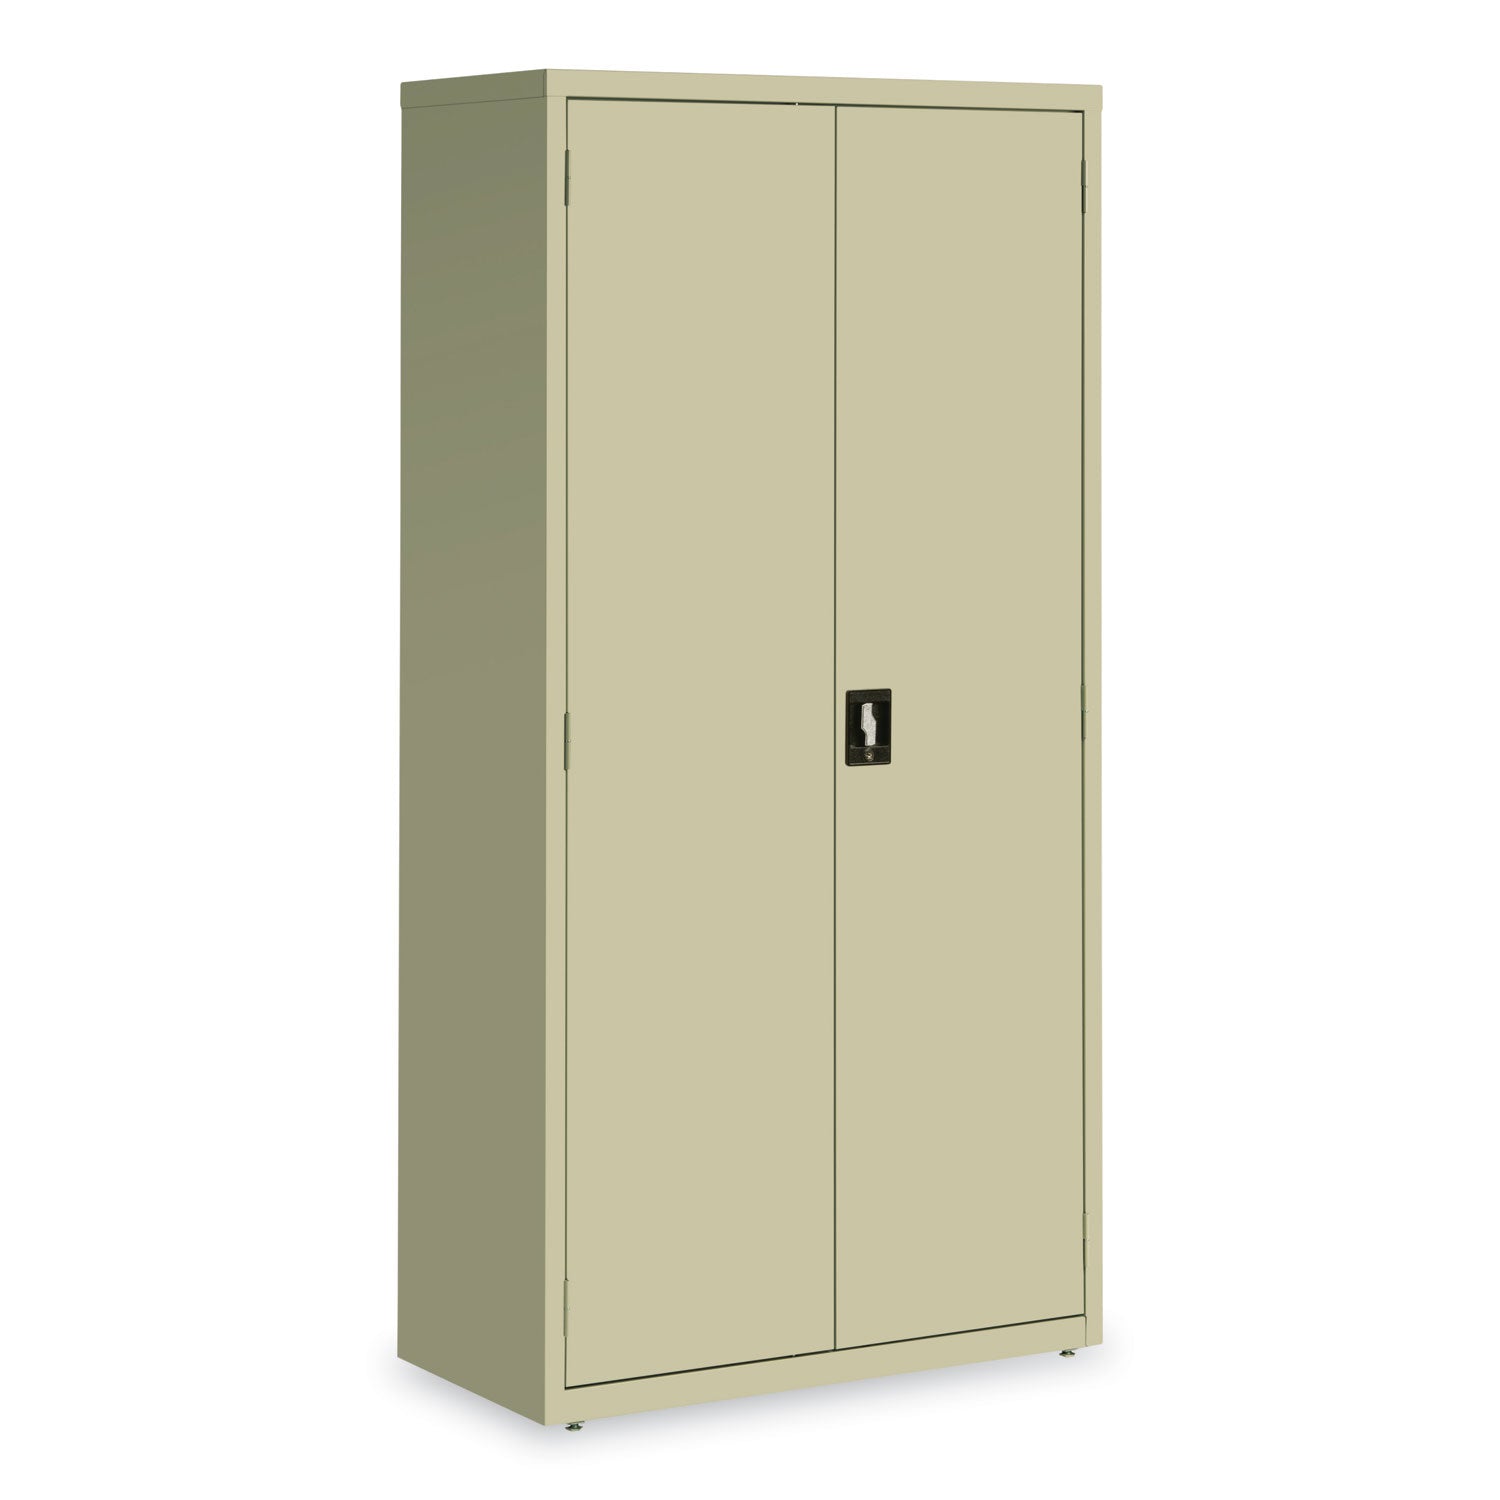 fully-assembled-storage-cabinets-5-shelves-36-x-18-x-72-putty_oifcm7218py - 2